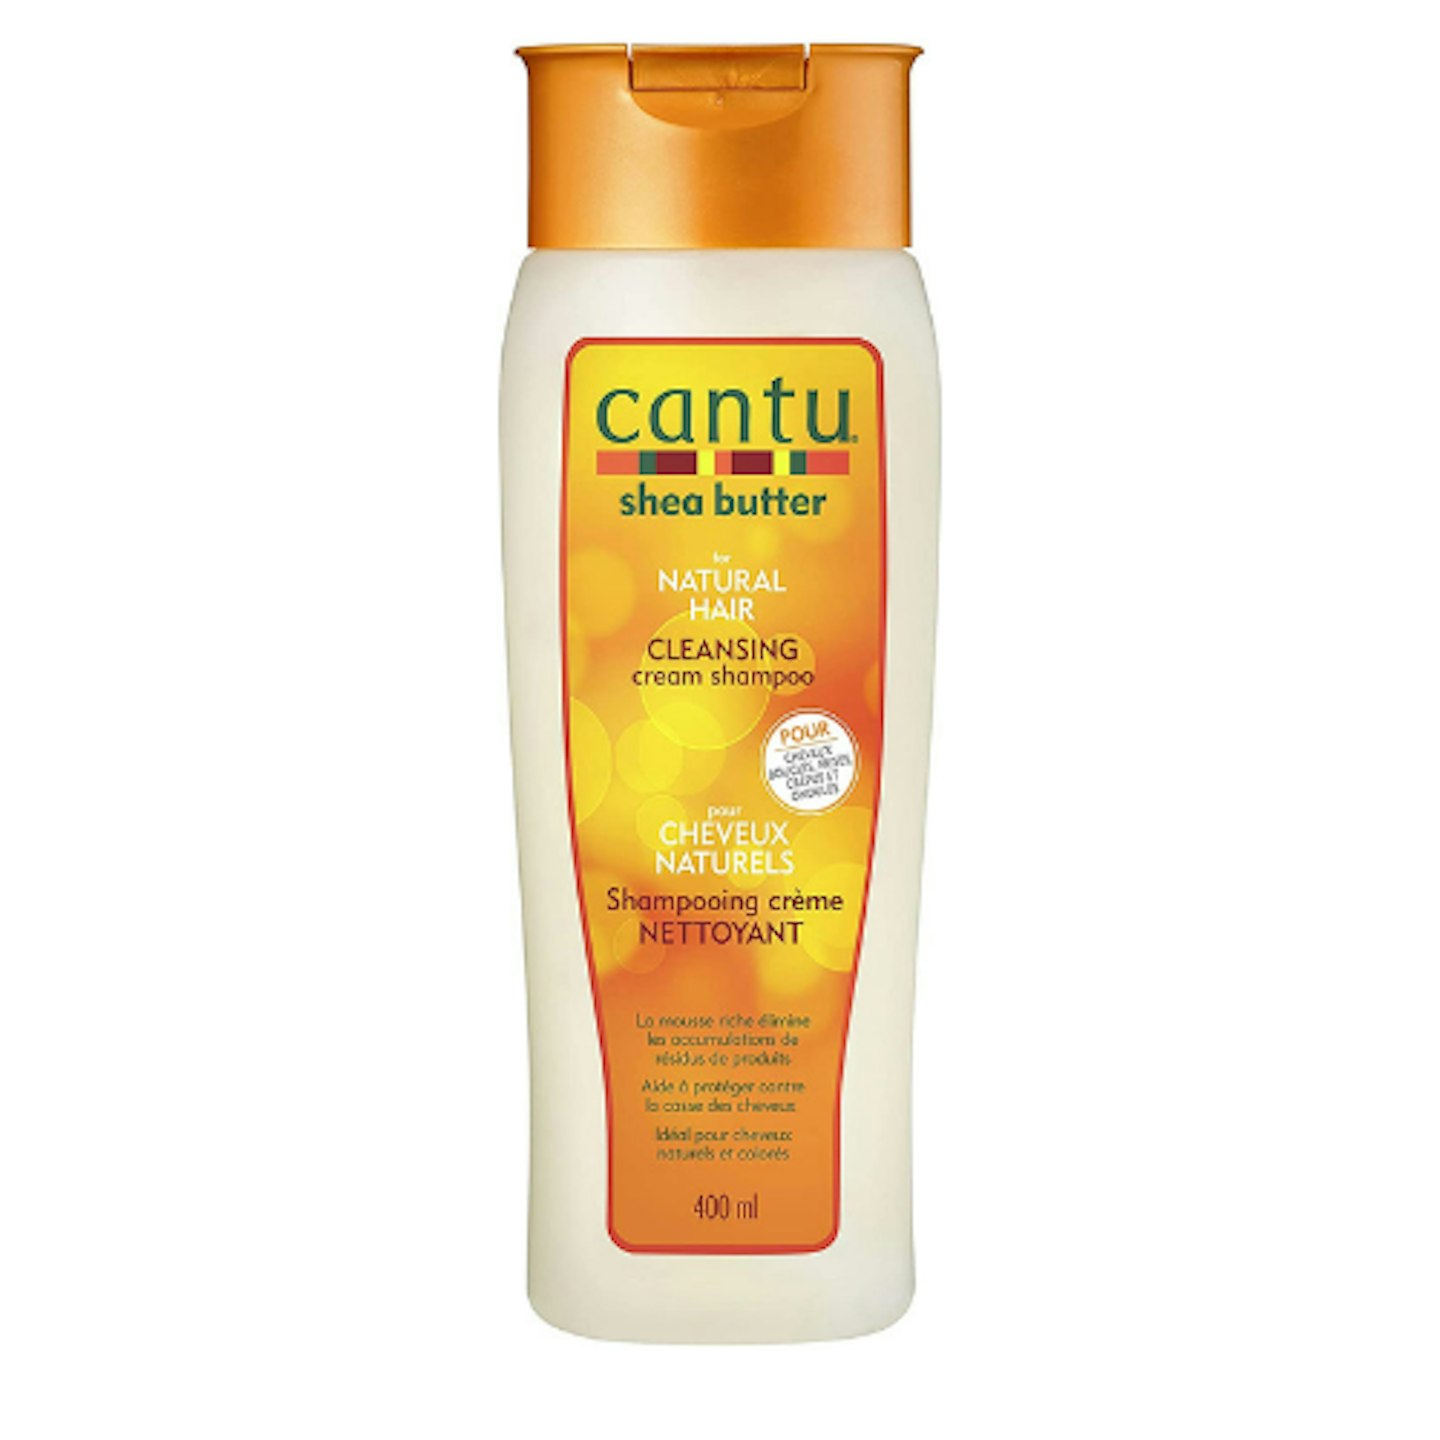 Cantu Shea Butter for Natural Hair Sulfate-Free Cleansing Cream Shampoo on white background